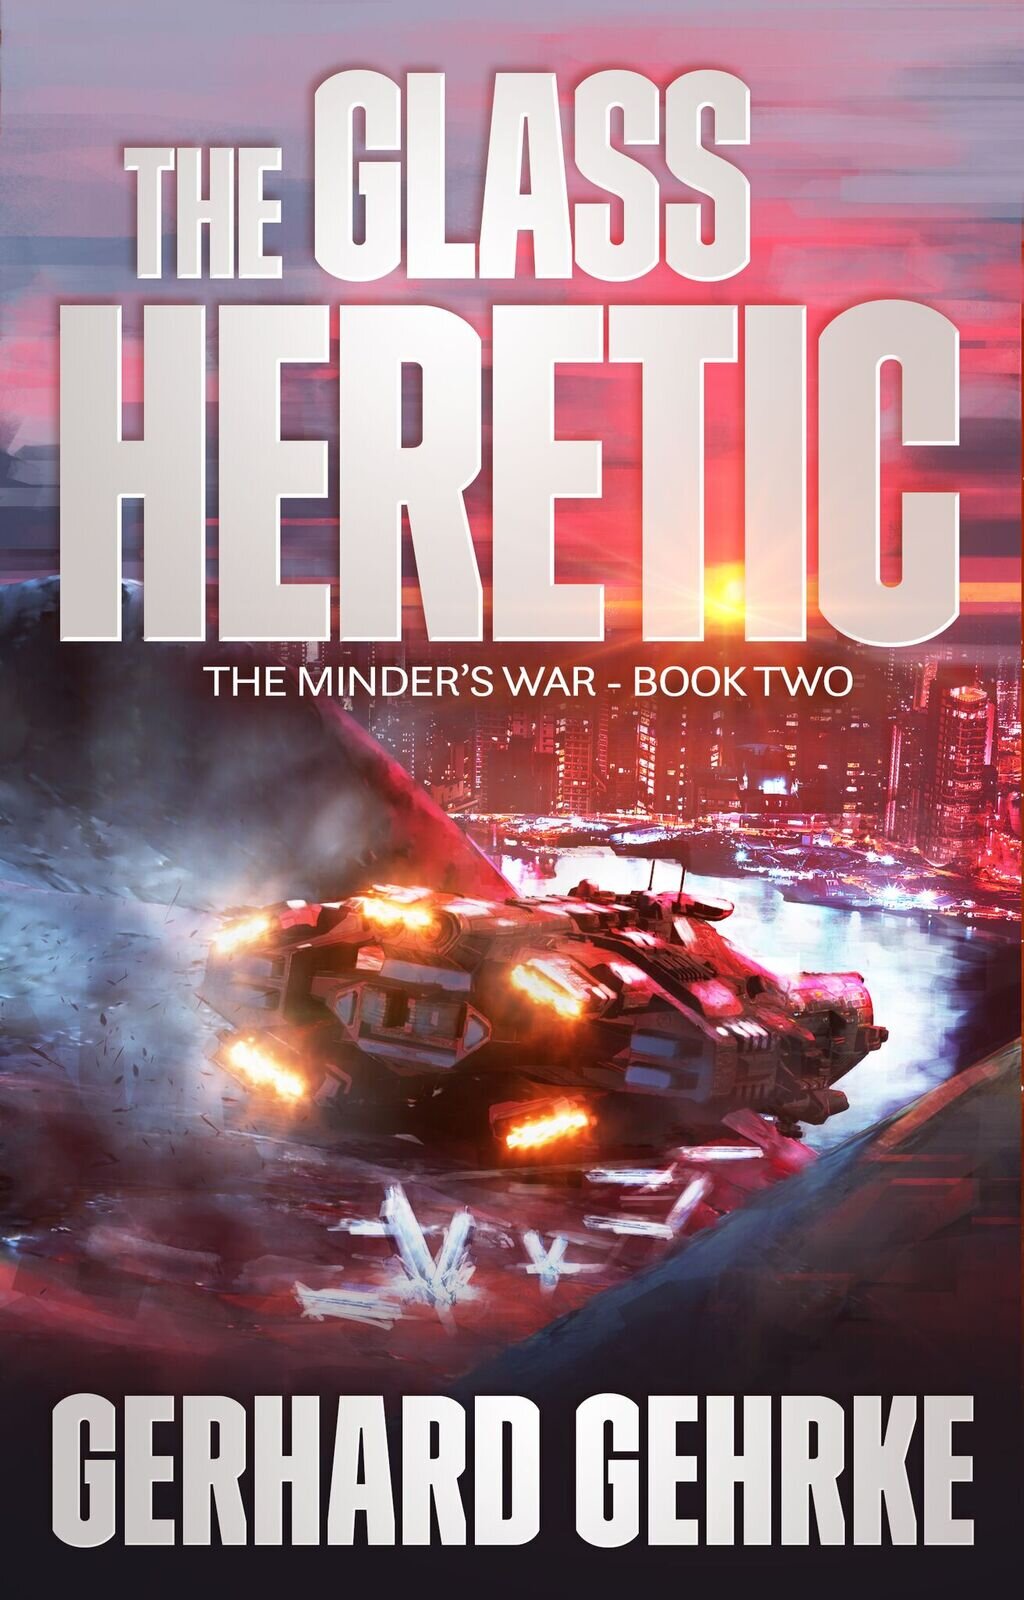 THE GLASS HERETIC - The Minder's War Book 2